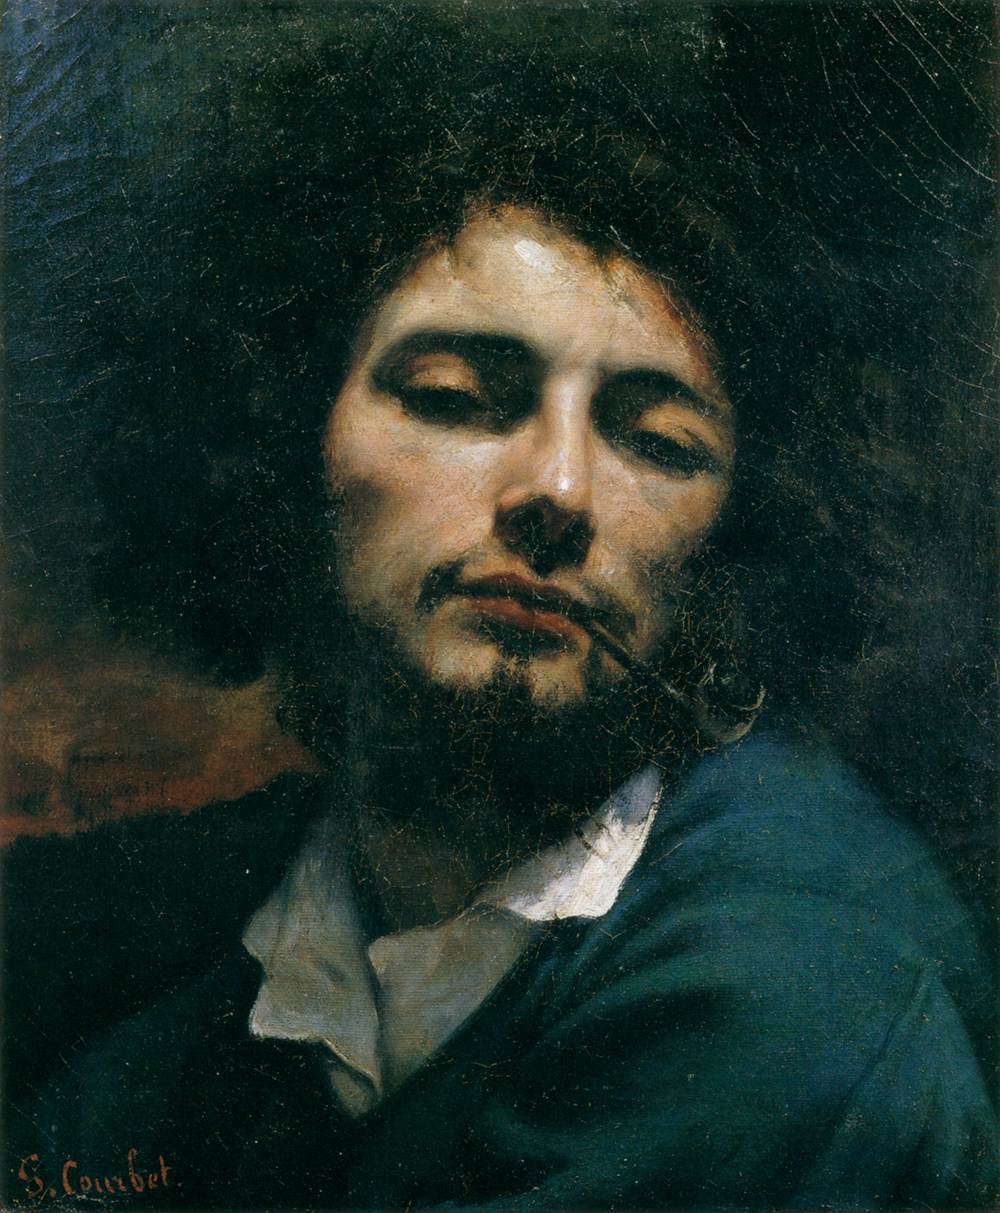 Gustave_Courbet_-_Self-Portrait_Man_with_Pipe_-_WGA05491.jpg